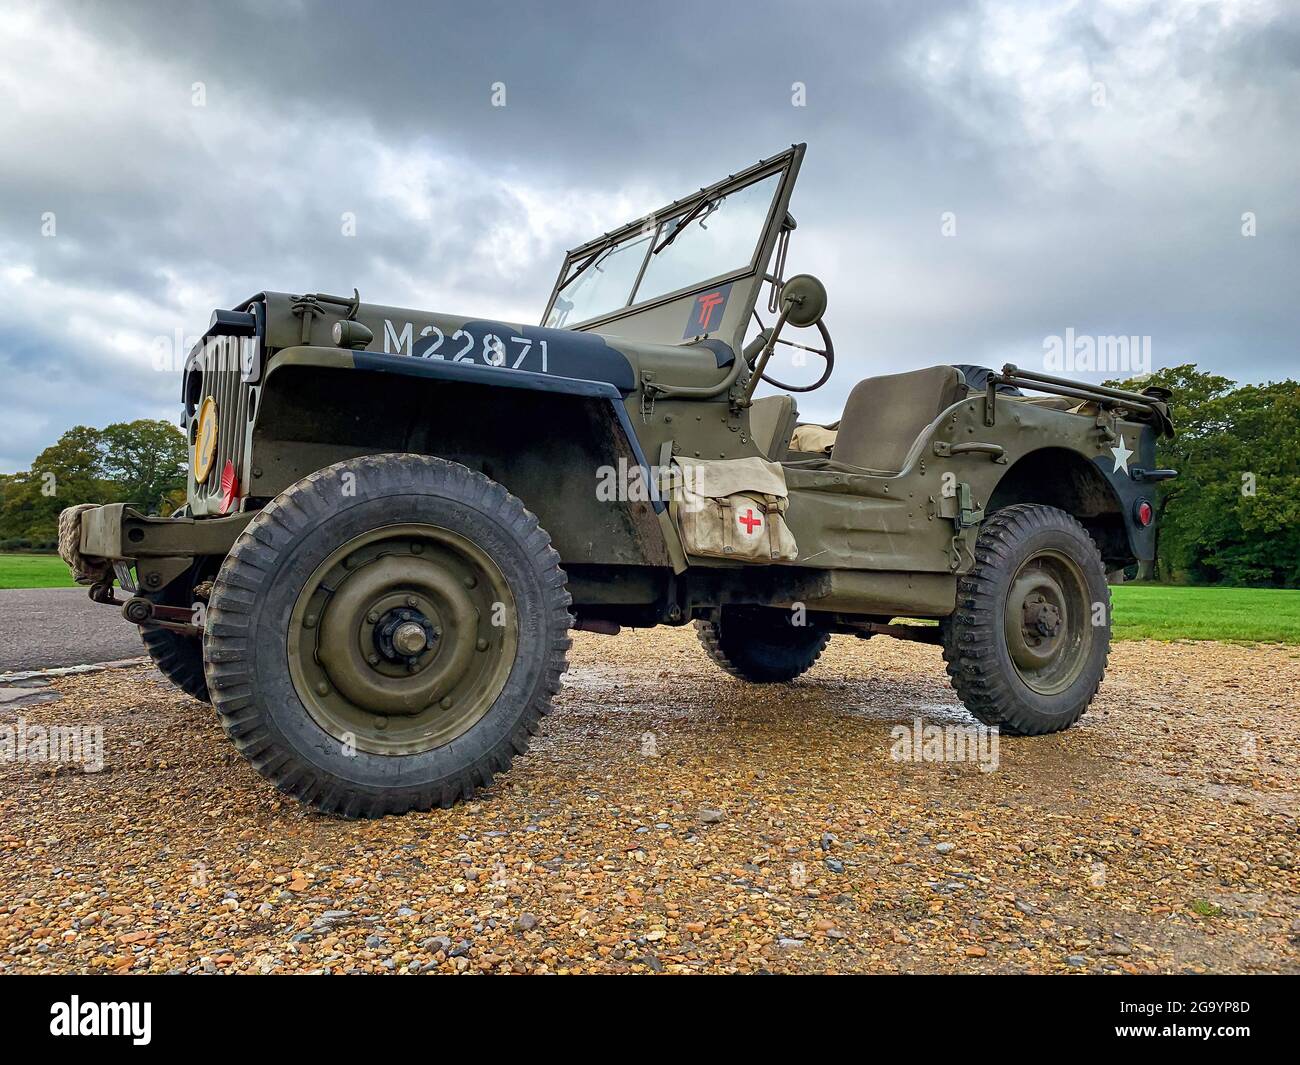 Southampton, UK - 3rd November 2019: Low level view of a British military World War 2 Jeep with Red Cross medical bag and Army camouflage finish. Sout Stock Photo